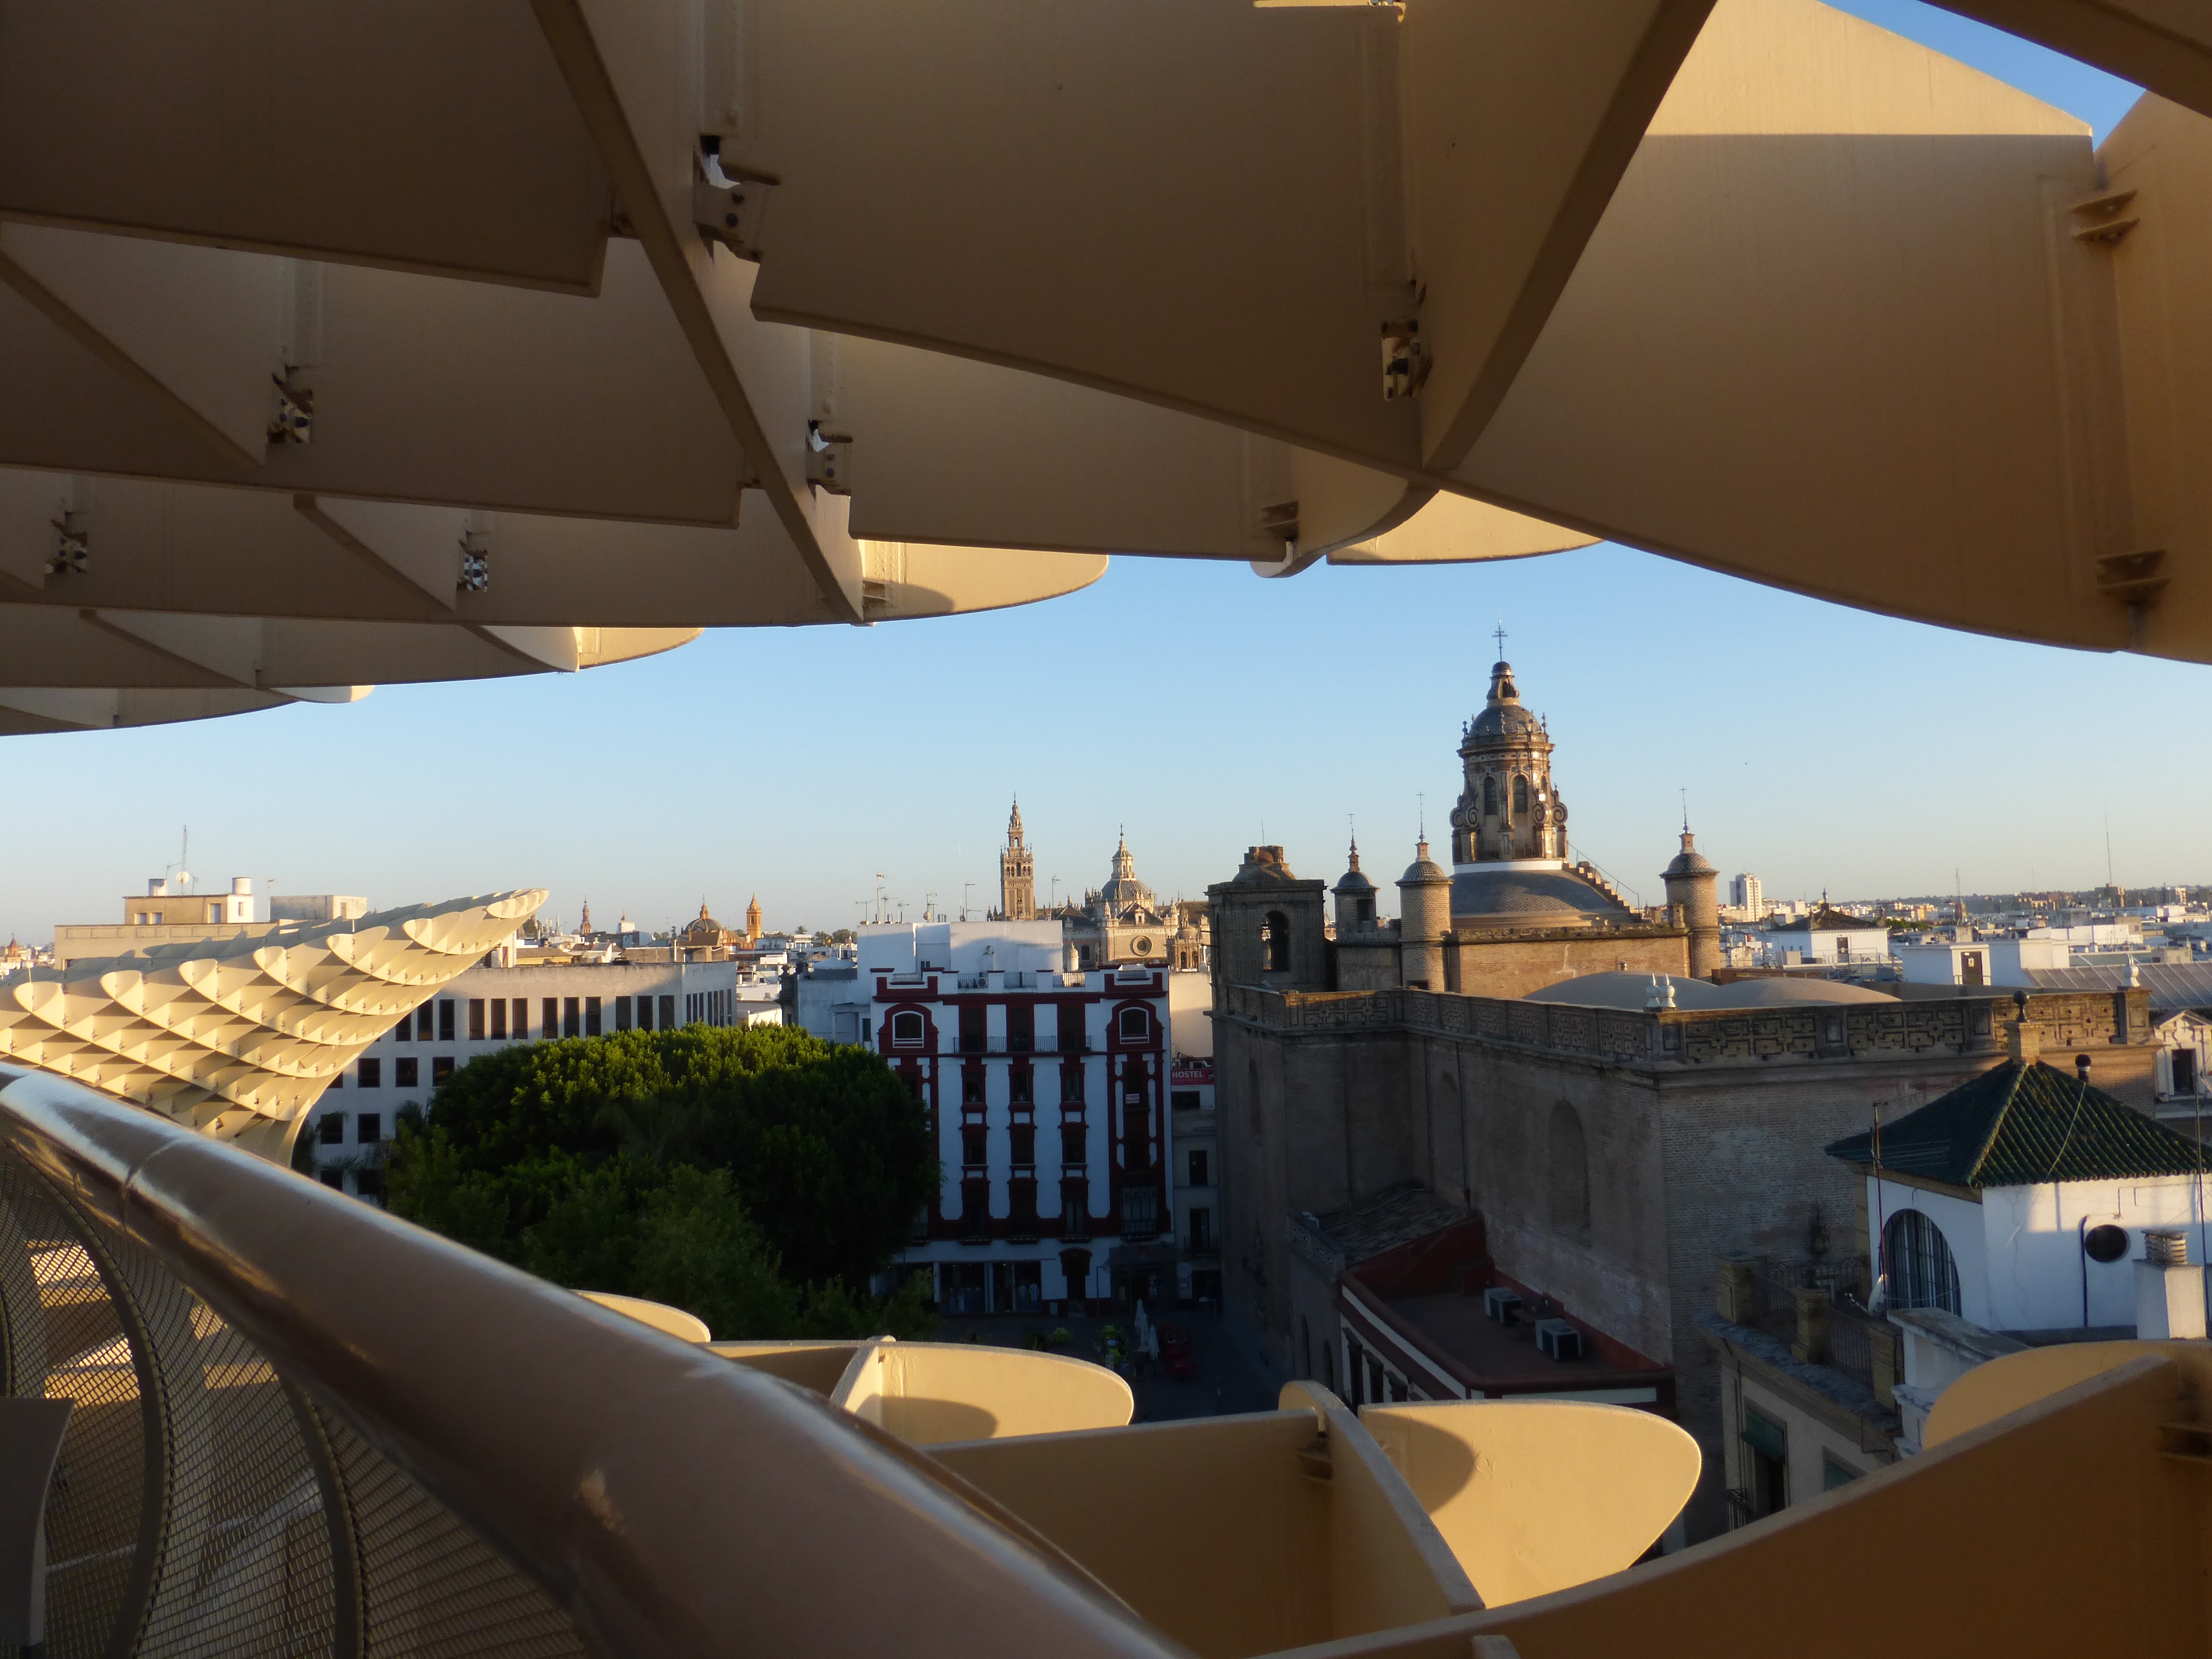 View of the skyline of Sevilla from Las Setas, an art installation in the City Center